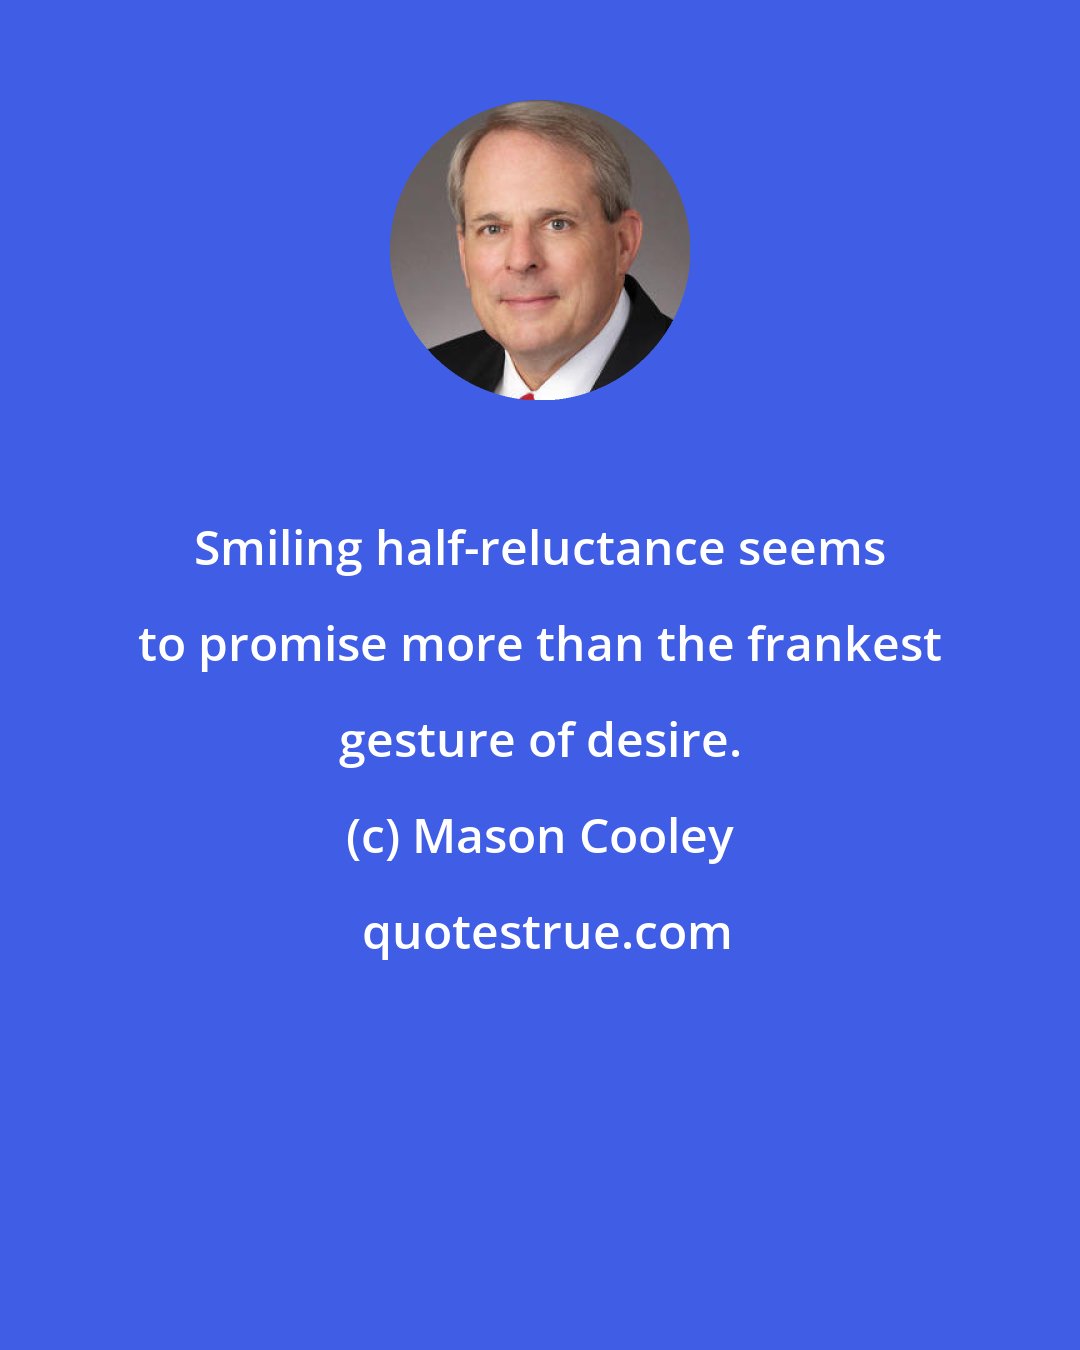 Mason Cooley: Smiling half-reluctance seems to promise more than the frankest gesture of desire.